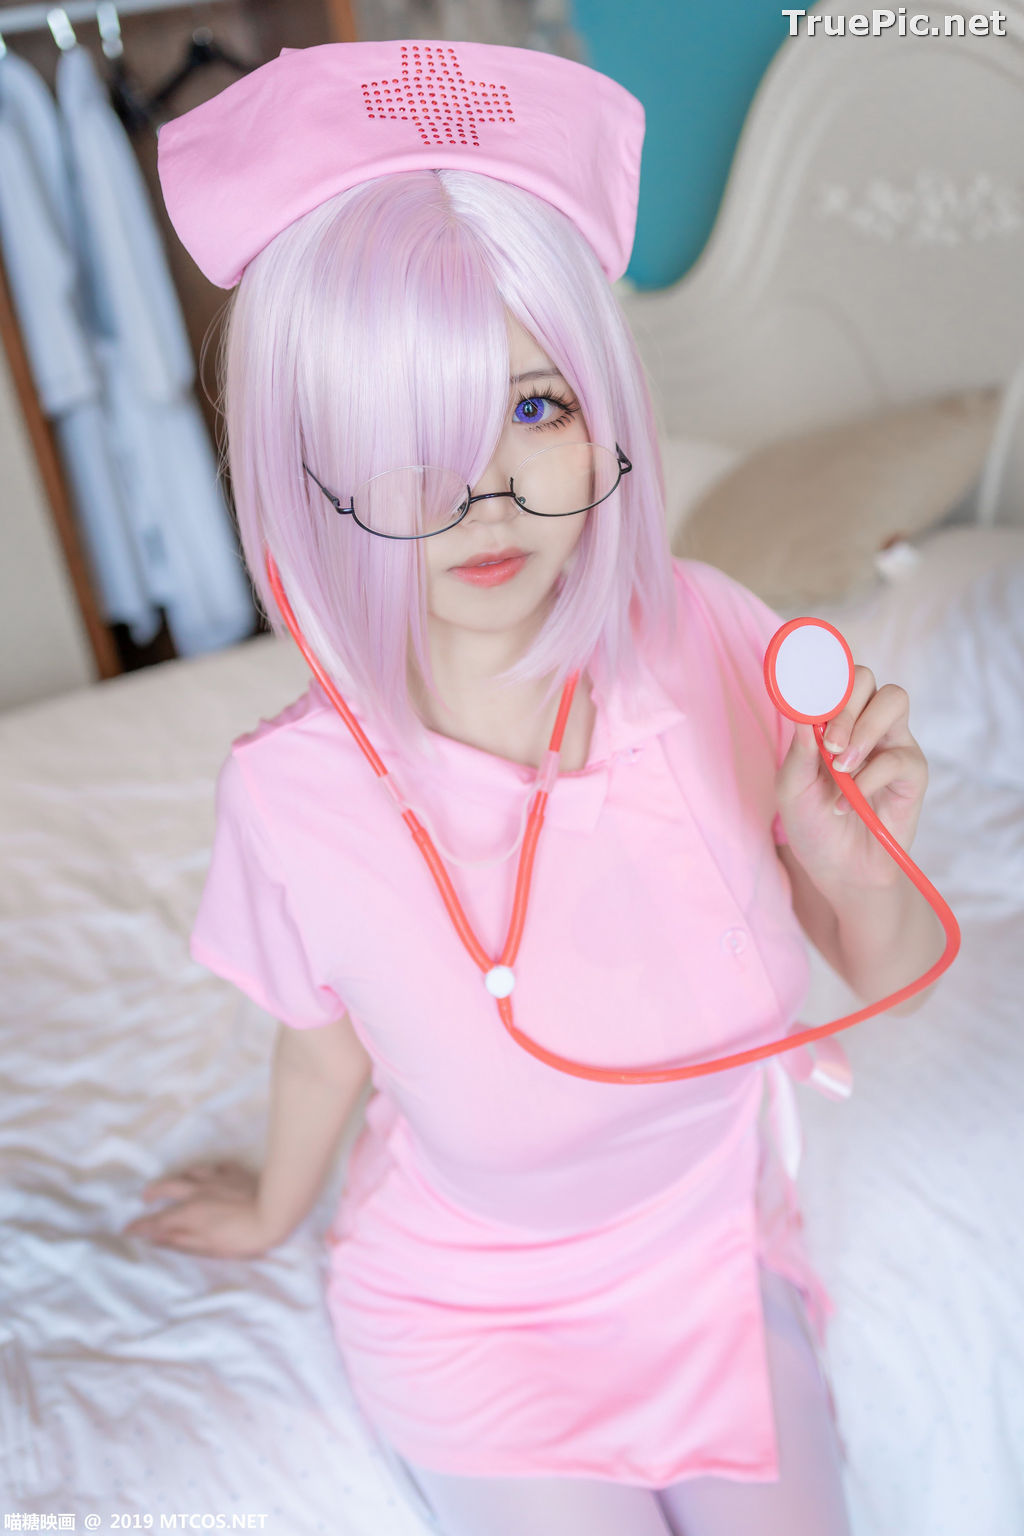 Image [MTCos] 喵糖映画 Vol.033 – Chinese Cute Model - Pink Nurse Cosplay - TruePic.net - Picture-30